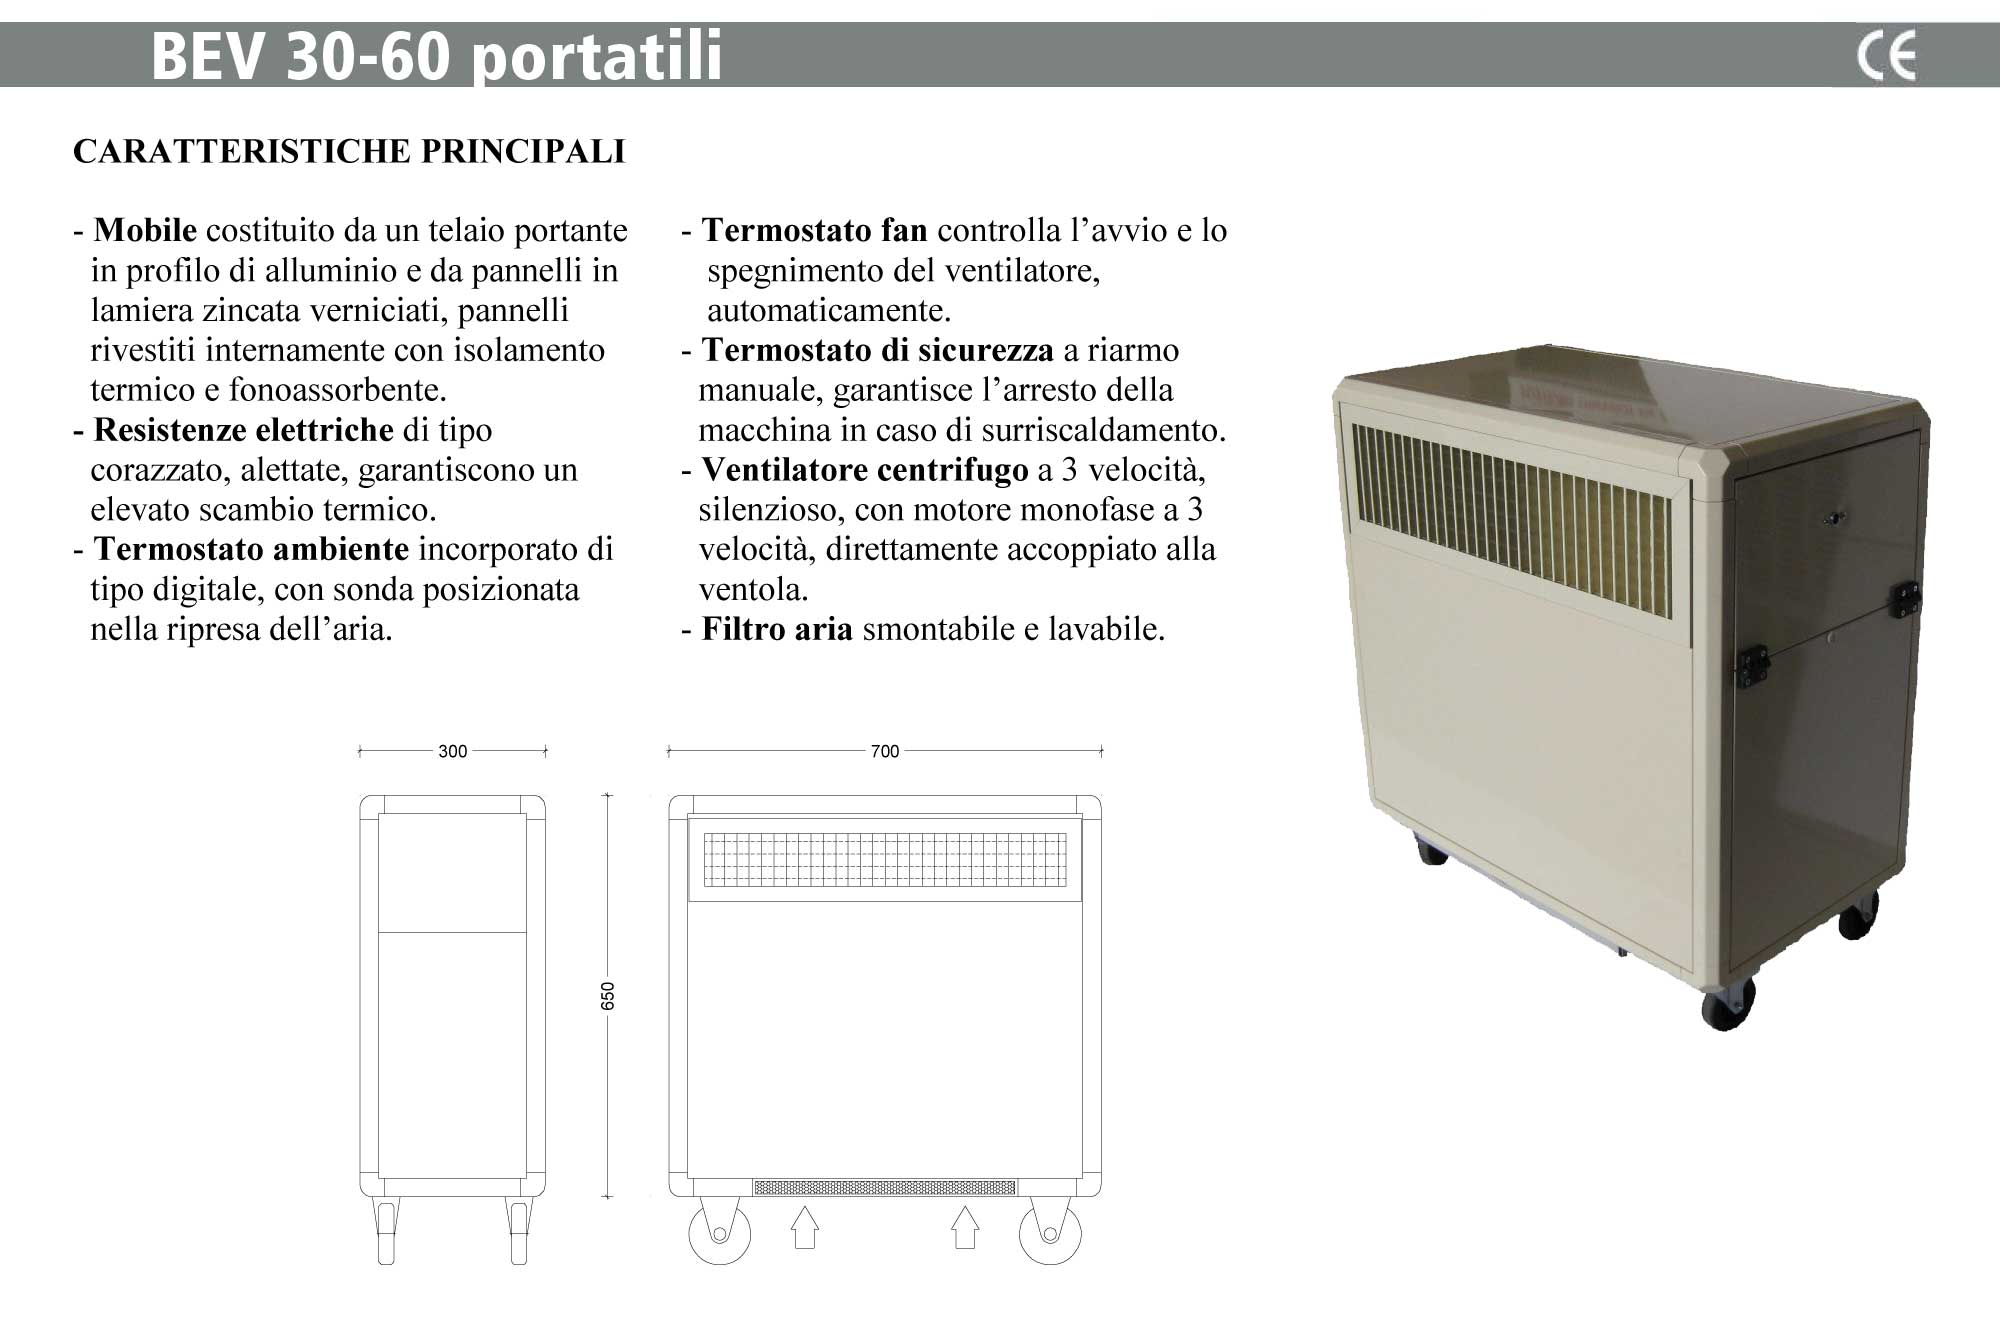 Portable ventilated thermoelectric groups BEV_30-60